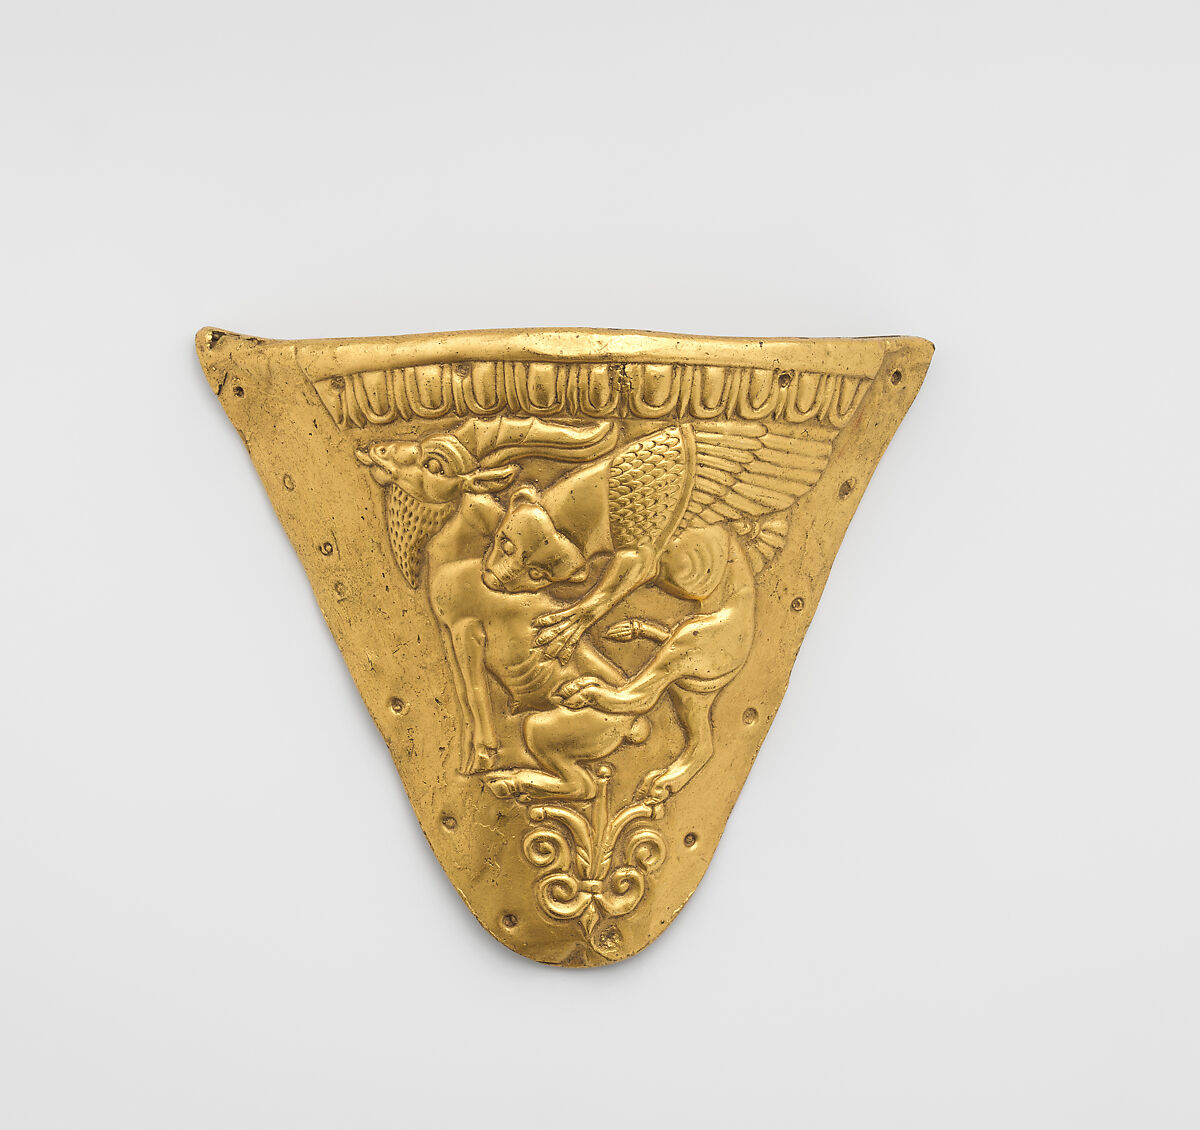 Reproduction of a Scythian plaque with animal combat